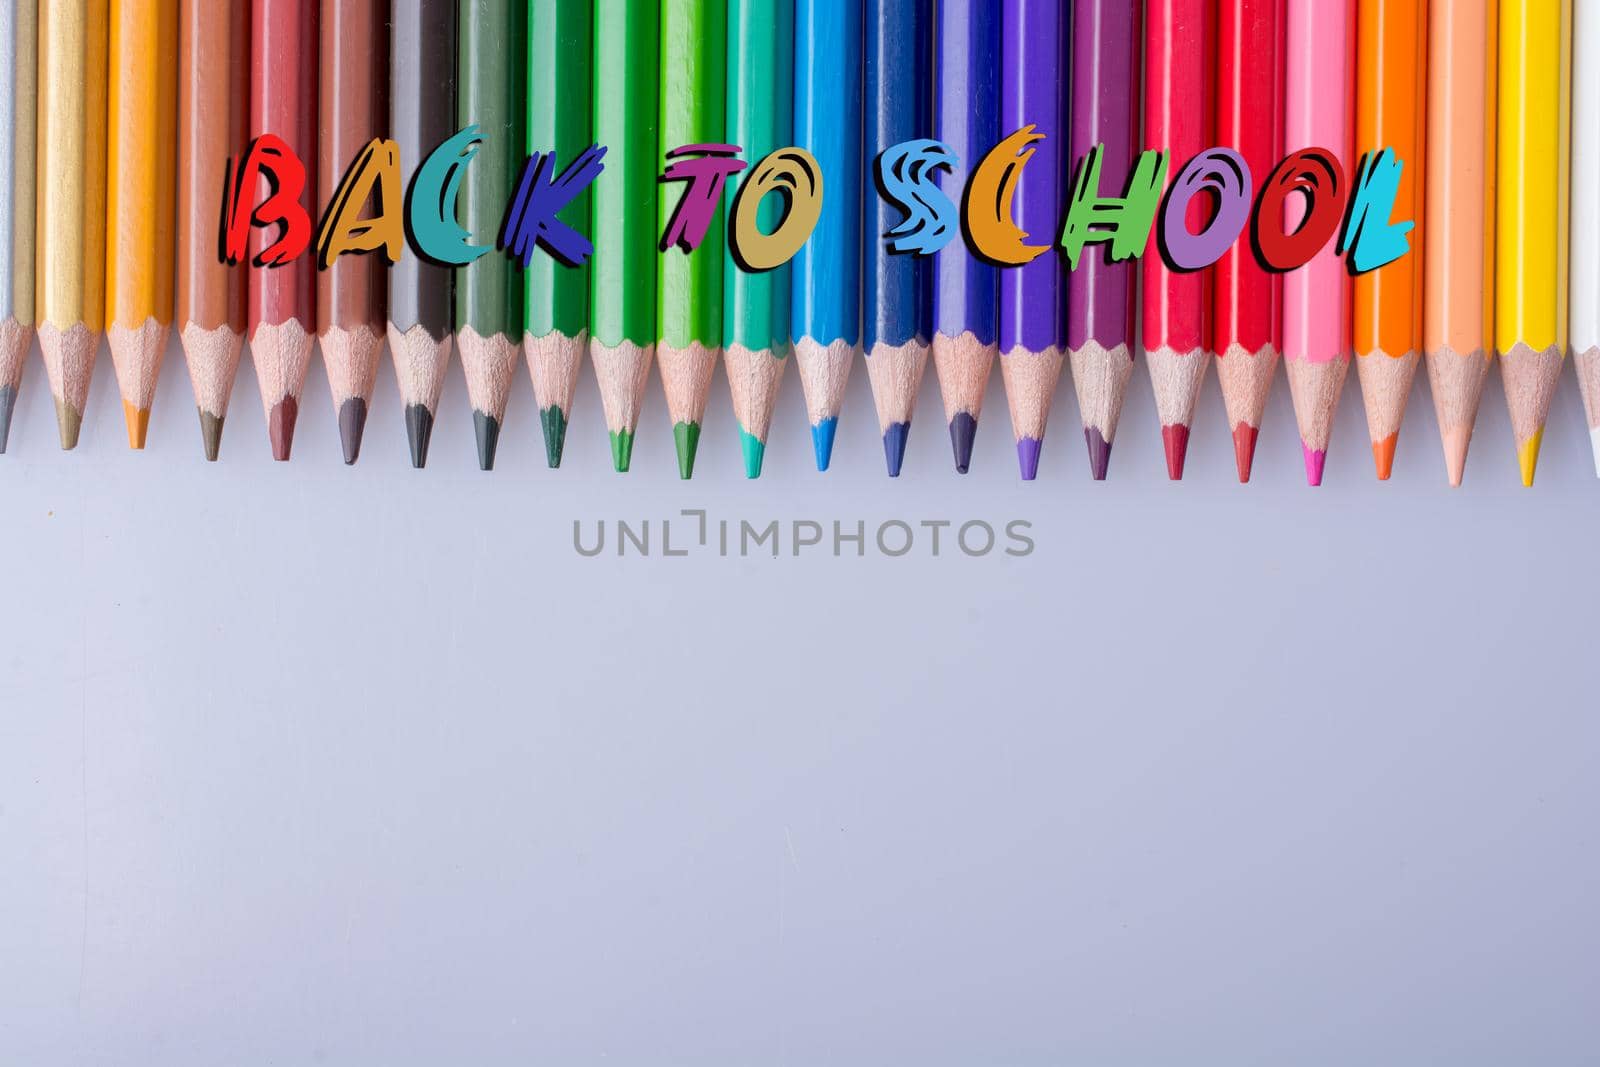  Color Pencils placed on a white background by berkay